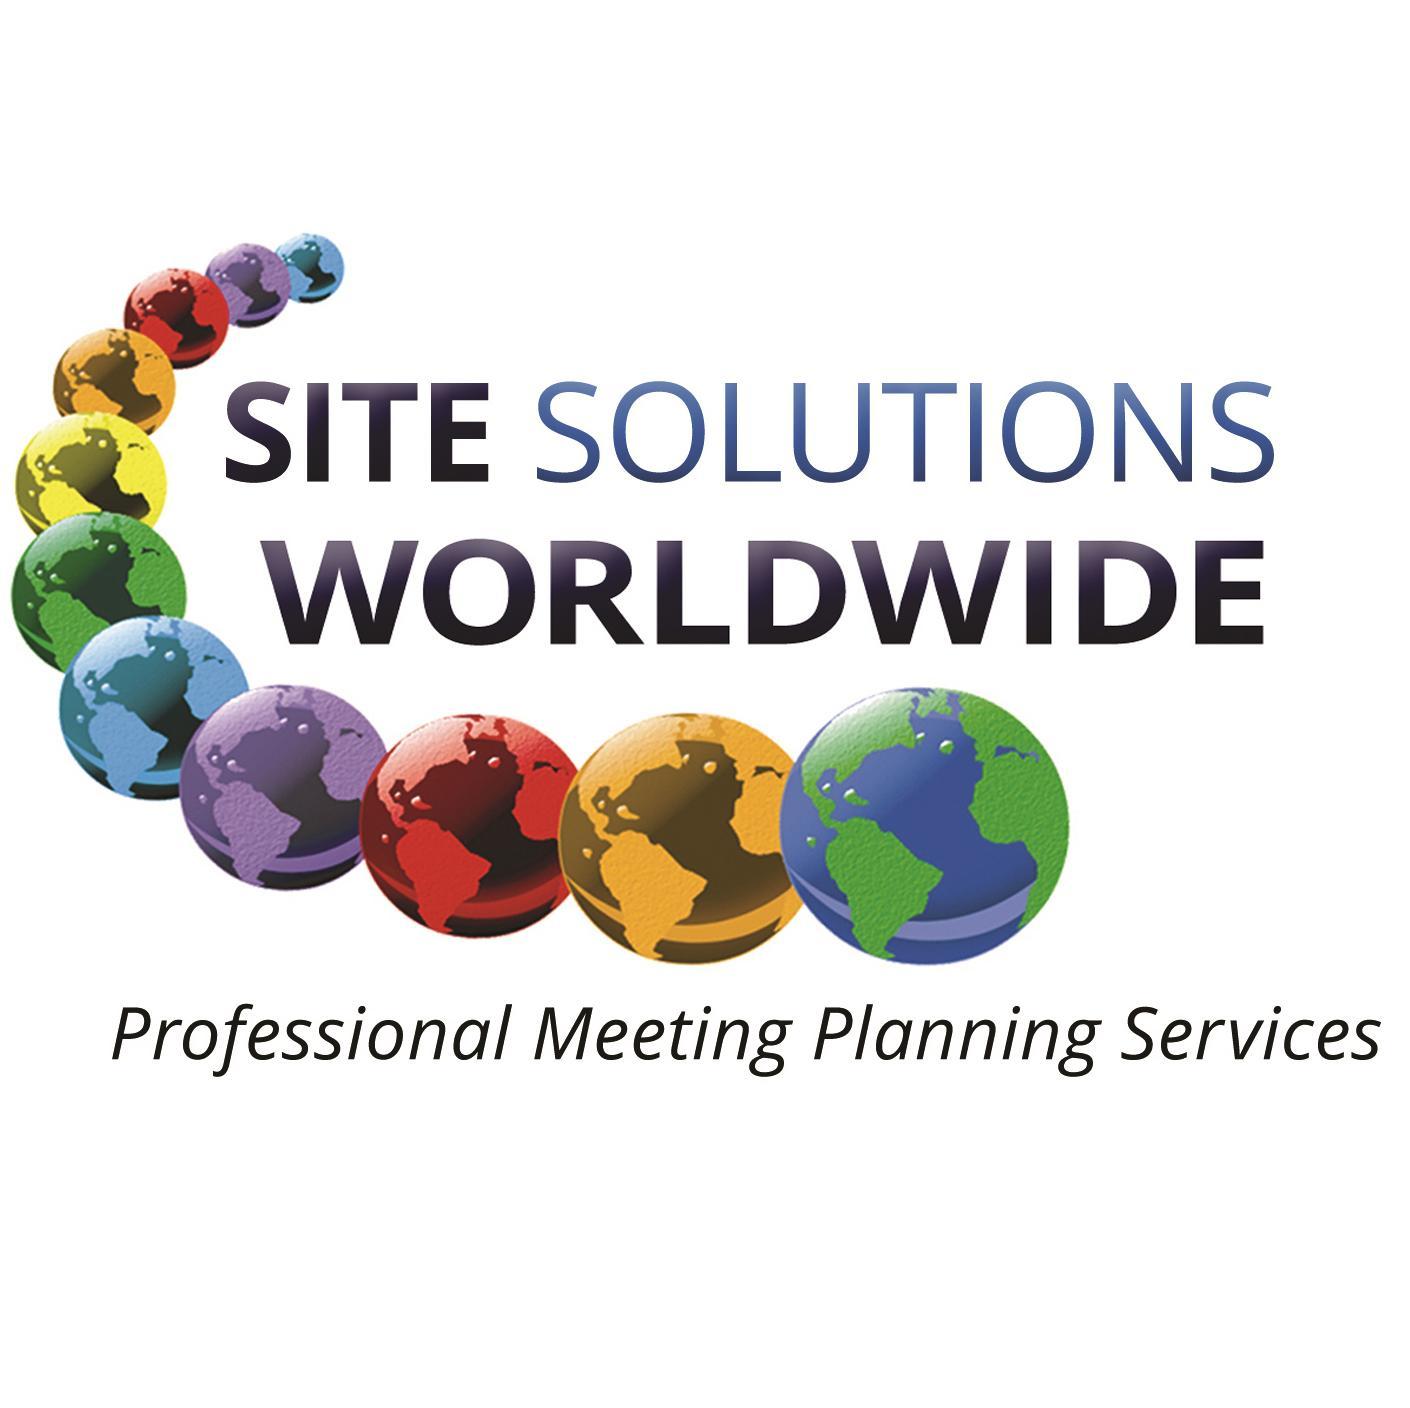 Professional meeting planning services for corporate, association and government meetings globally.